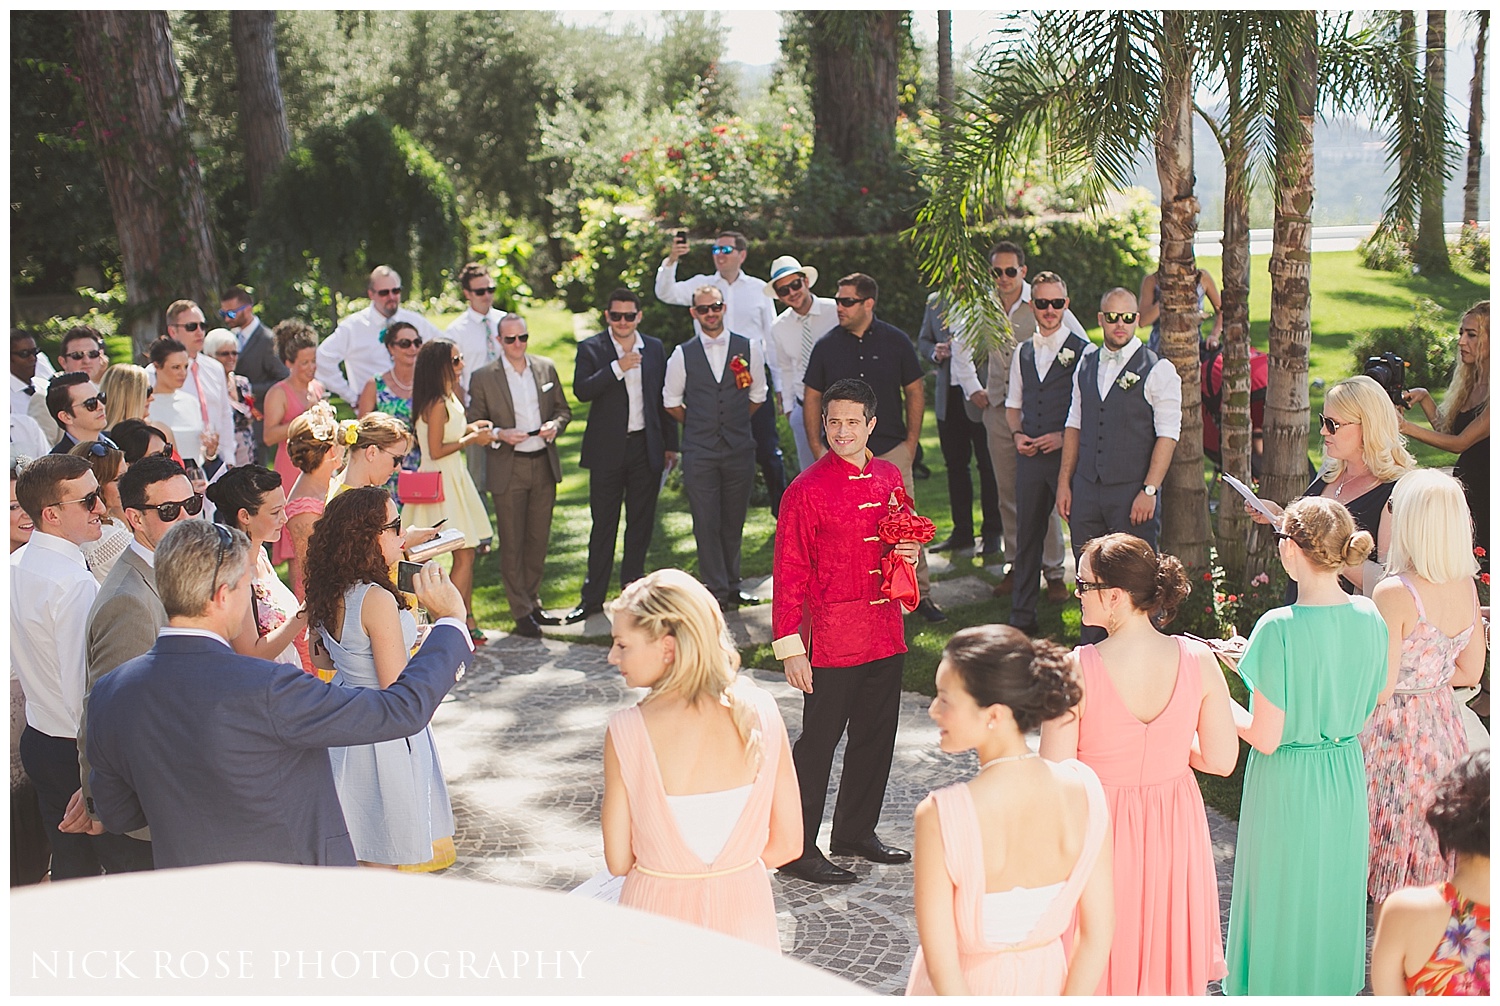 Destination Chinese Wedding in Sorrento Italy